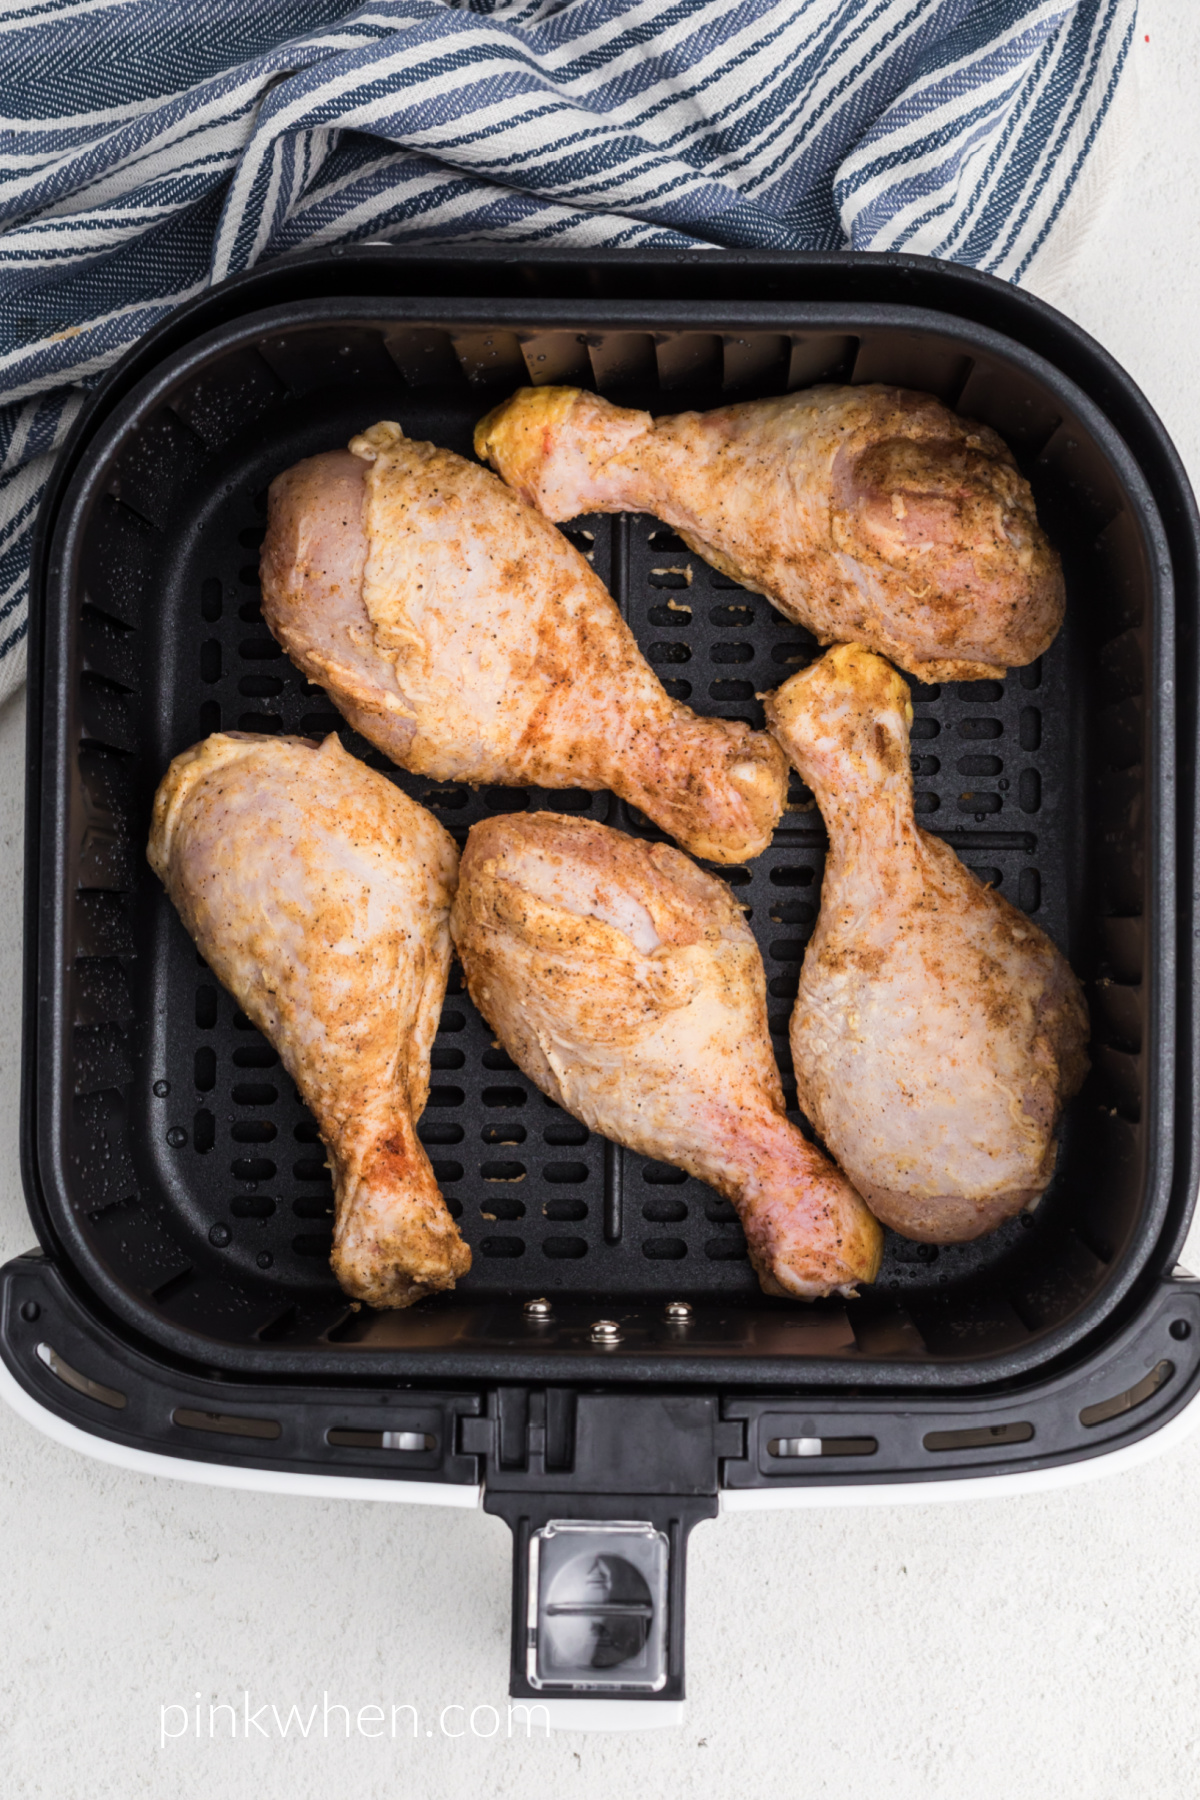 Seasoned chicken drumsticks in a single layer in the air fryer basket ready to be cooked.